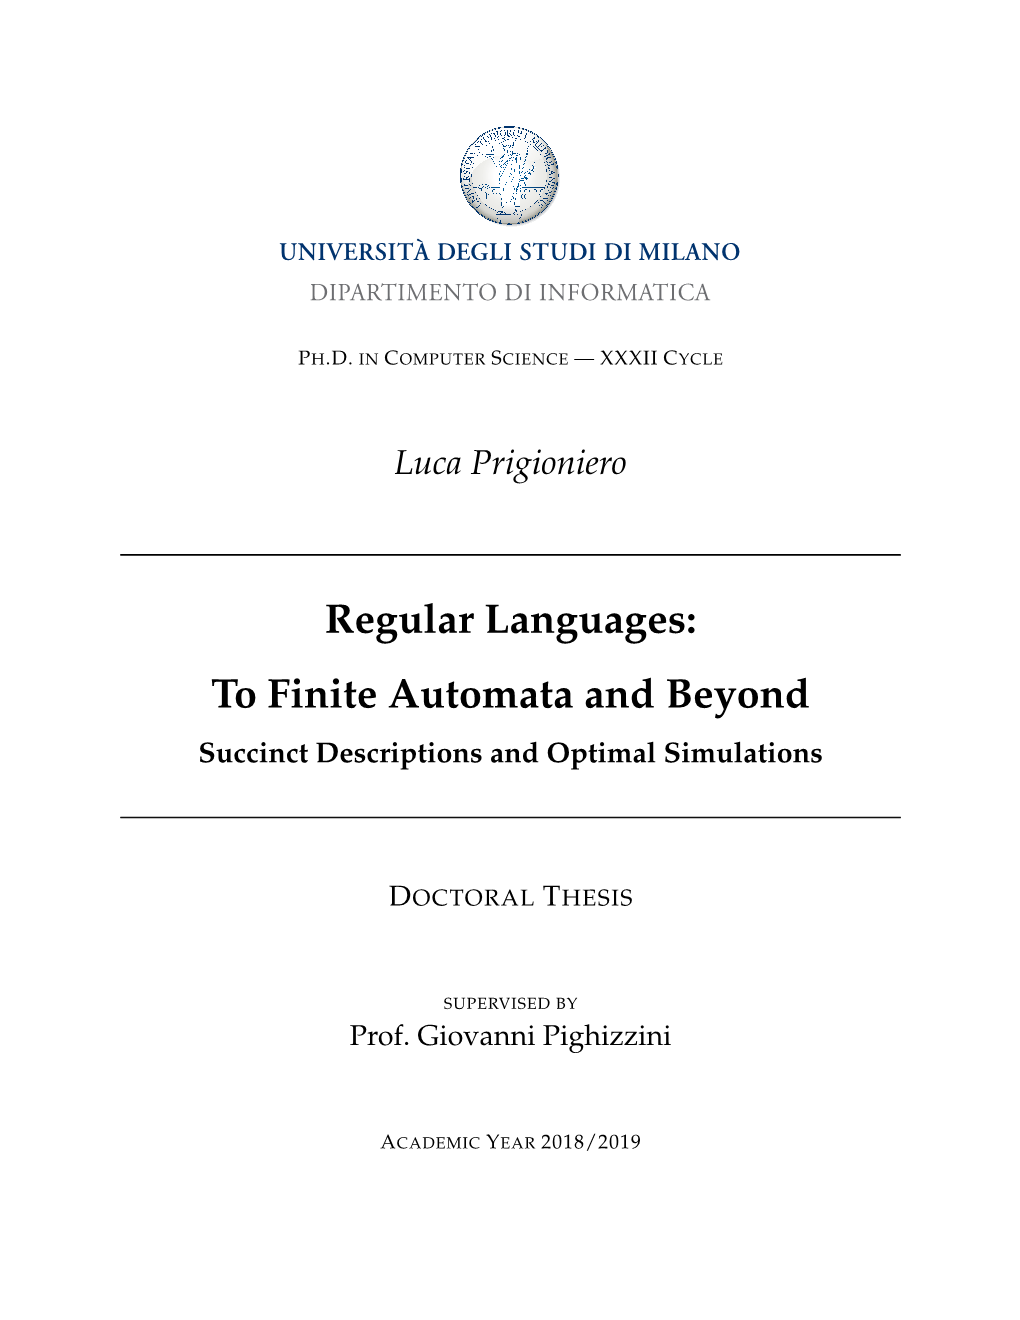 Regular Languages: to Finite Automata and Beyond Succinct Descriptions and Optimal Simulations